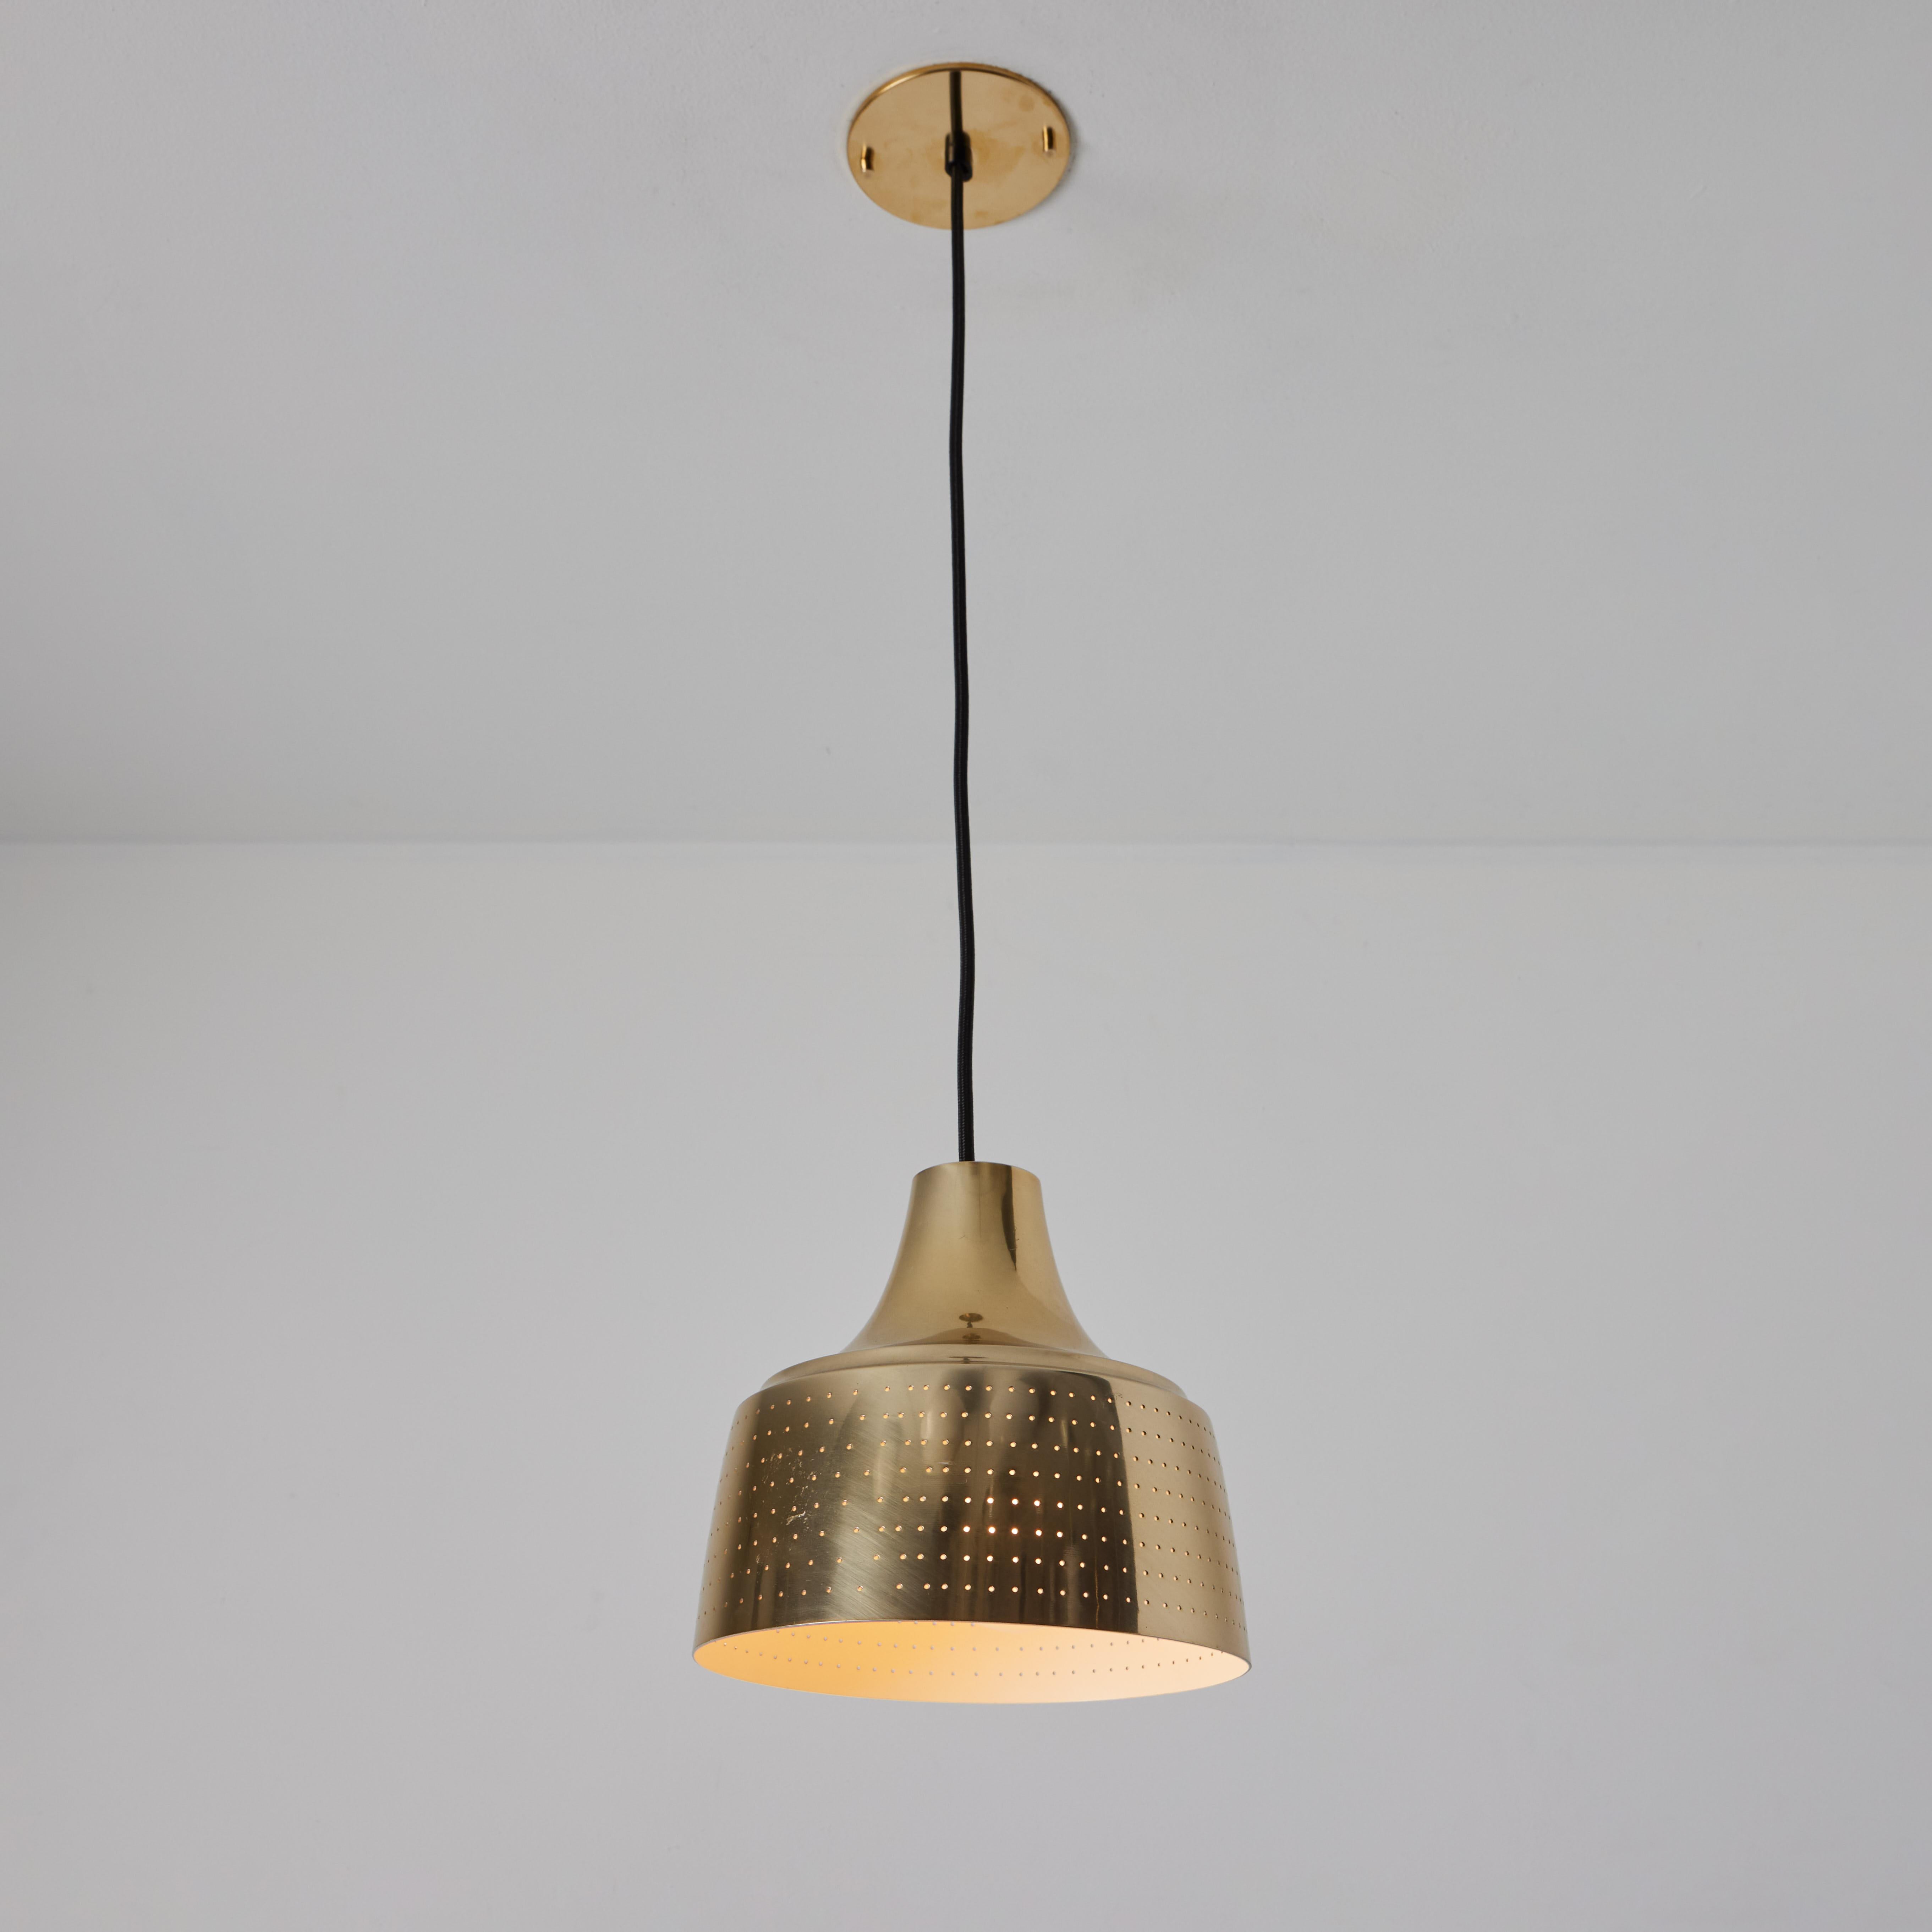 1950s Finnish Perforated Brass Pendant In The Manner of Paavo Tynell

Executed in perforated brass with an attractive patina, this sculptural pendant lamp is highly characteristic of Tynell's iconic work for Taito Oy in the late 1940s or early